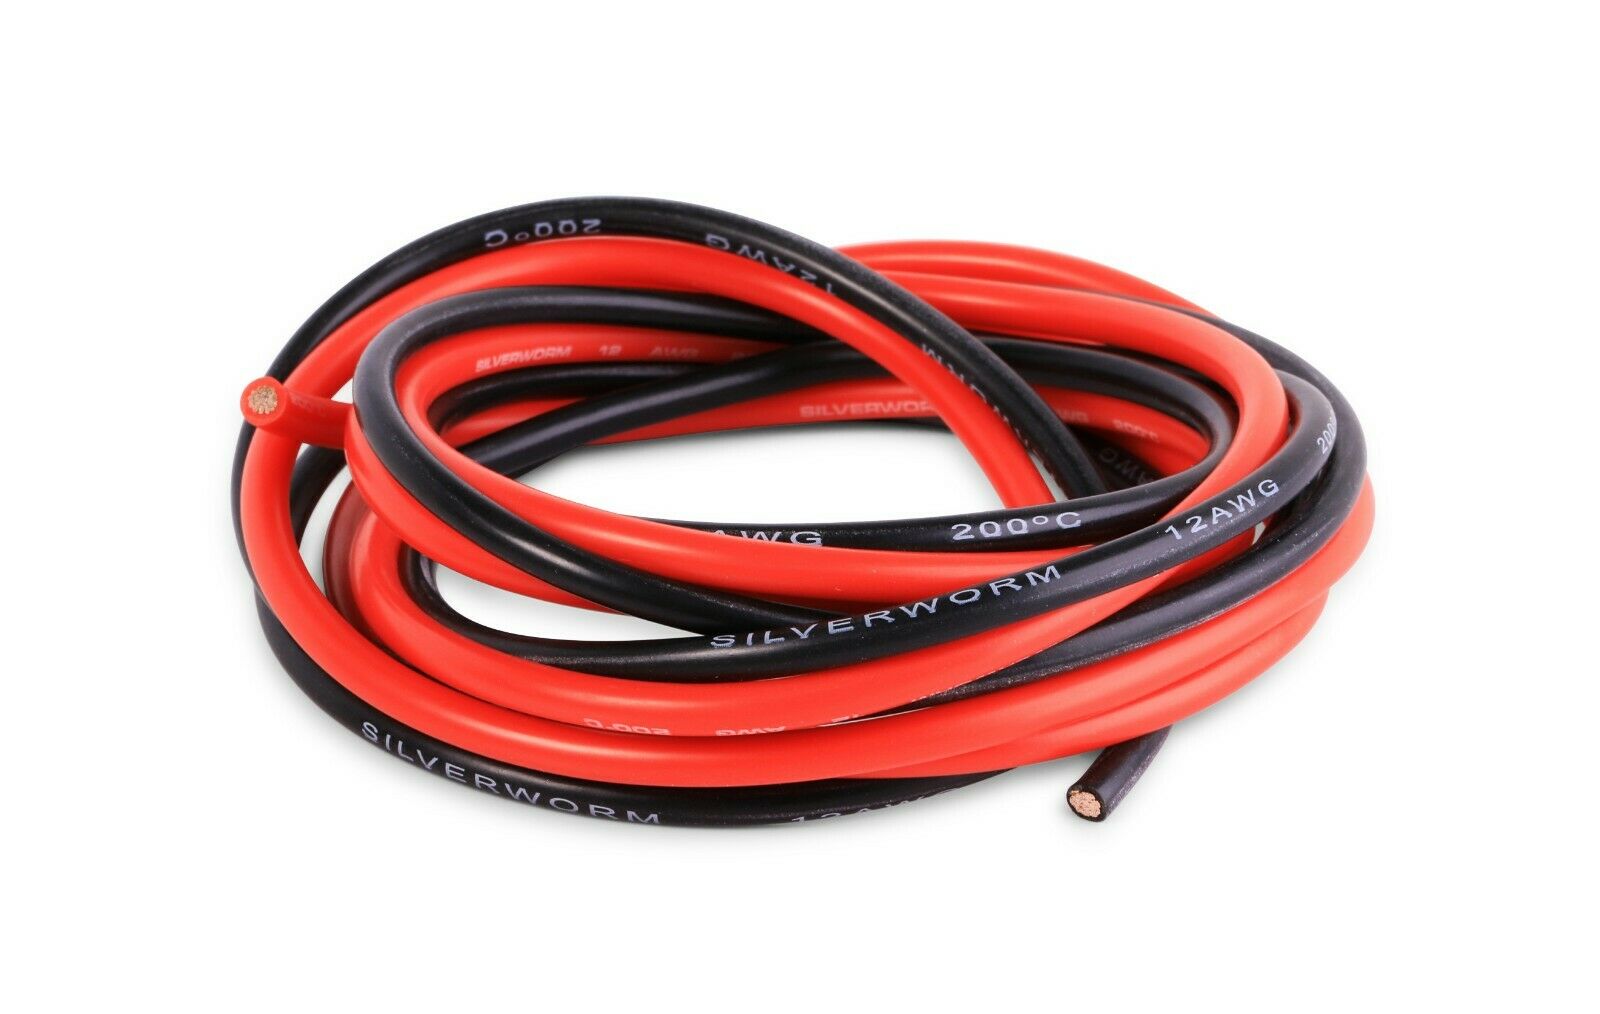 12 Gauge Silicone Wire 10 feet - 12 AWG Silicone Wire - Flexible Silicone Wire